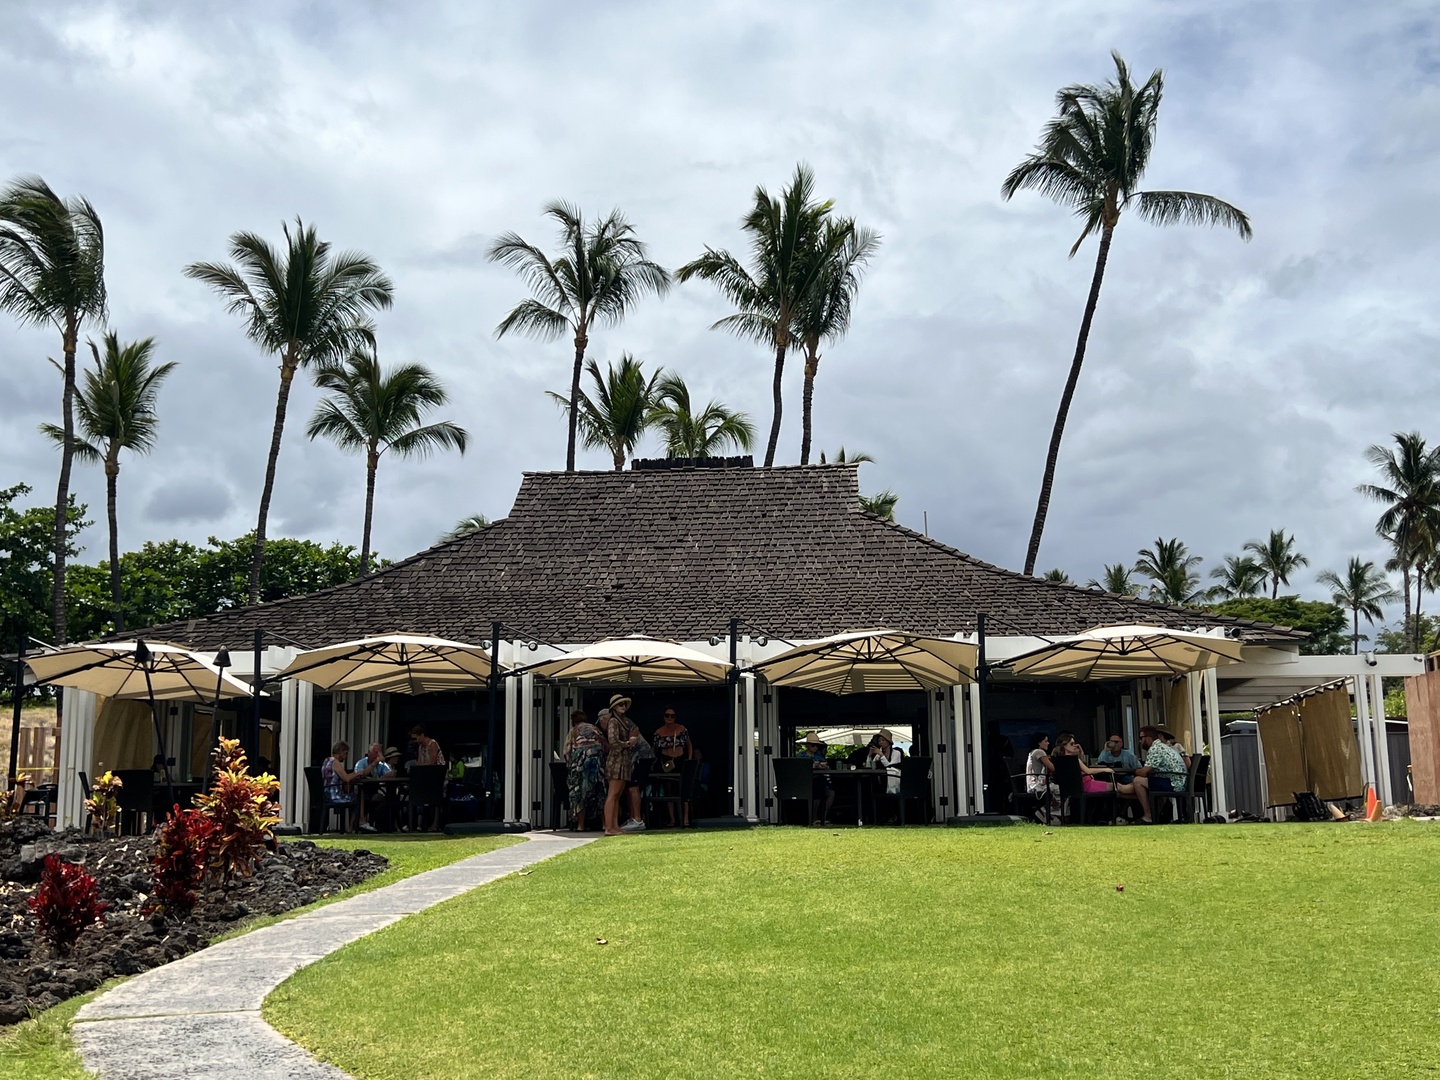 Kamuela Vacation Rentals, Mauna Lani Fairways #204 - Dine Amidst the Breezes at Our Open-Air Beachside Restaurant, Where the Waves Serenade Every Bite.